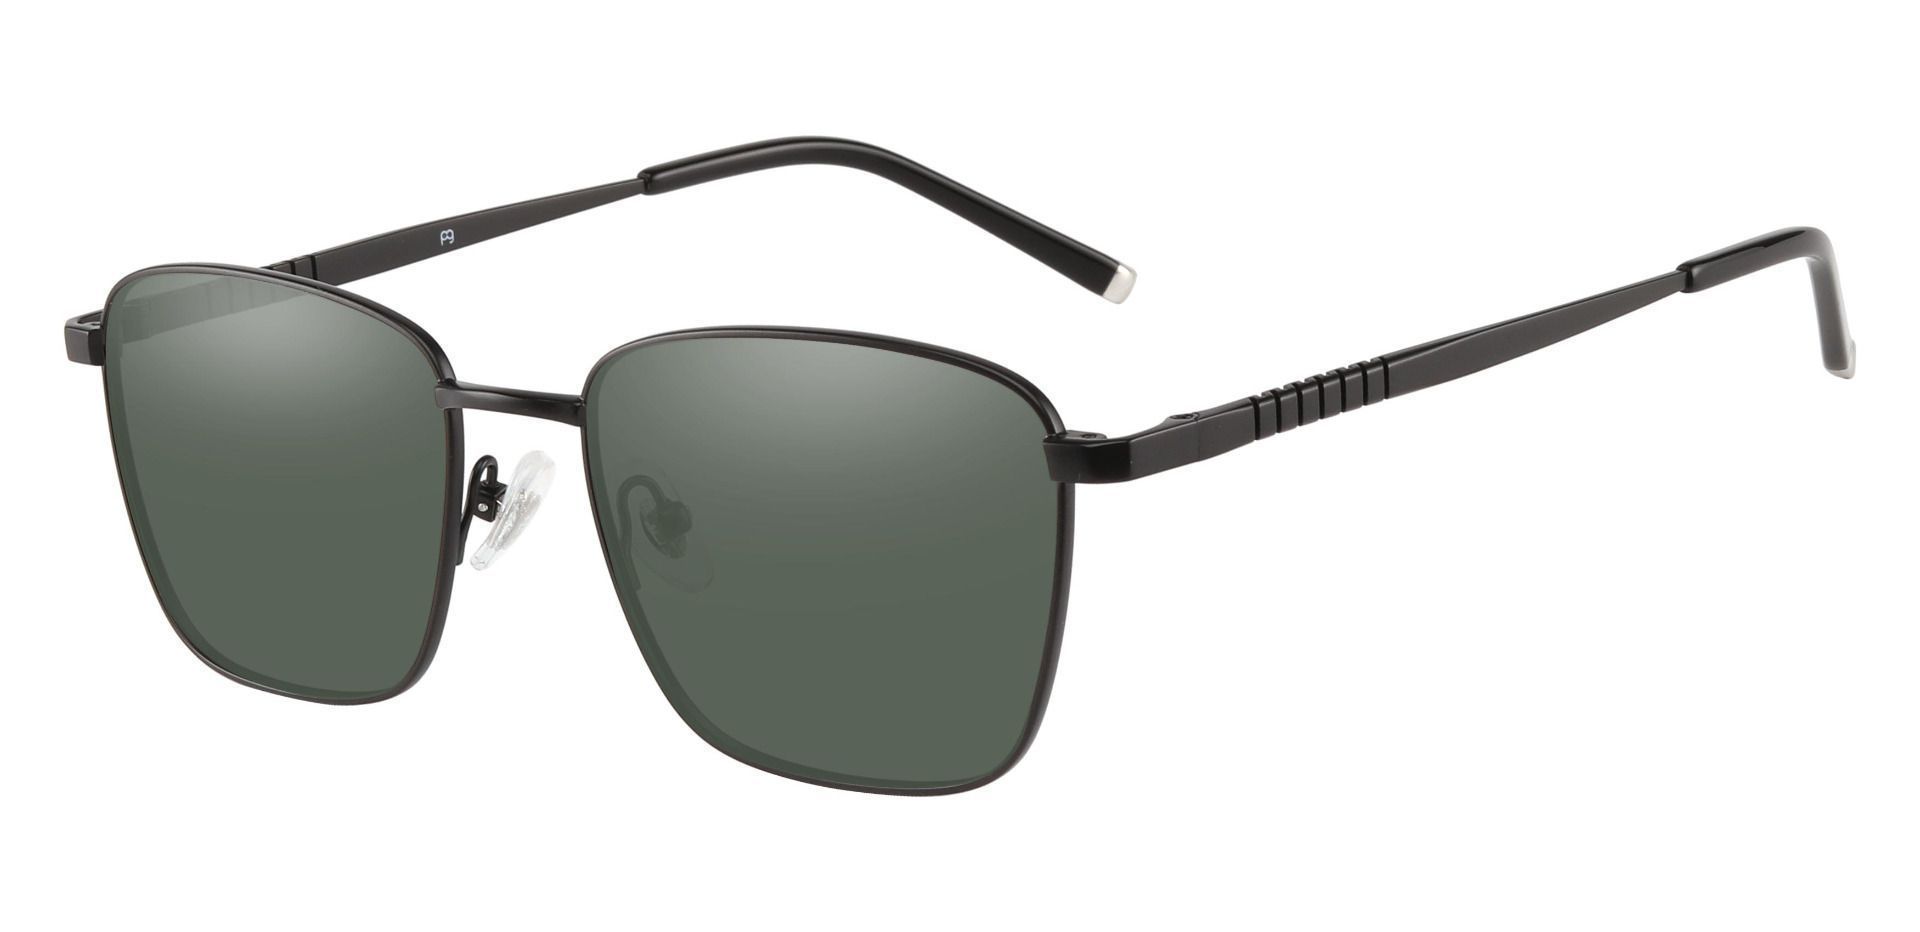 May Square Lined Bifocal Sunglasses - Black Frame With Green Lenses